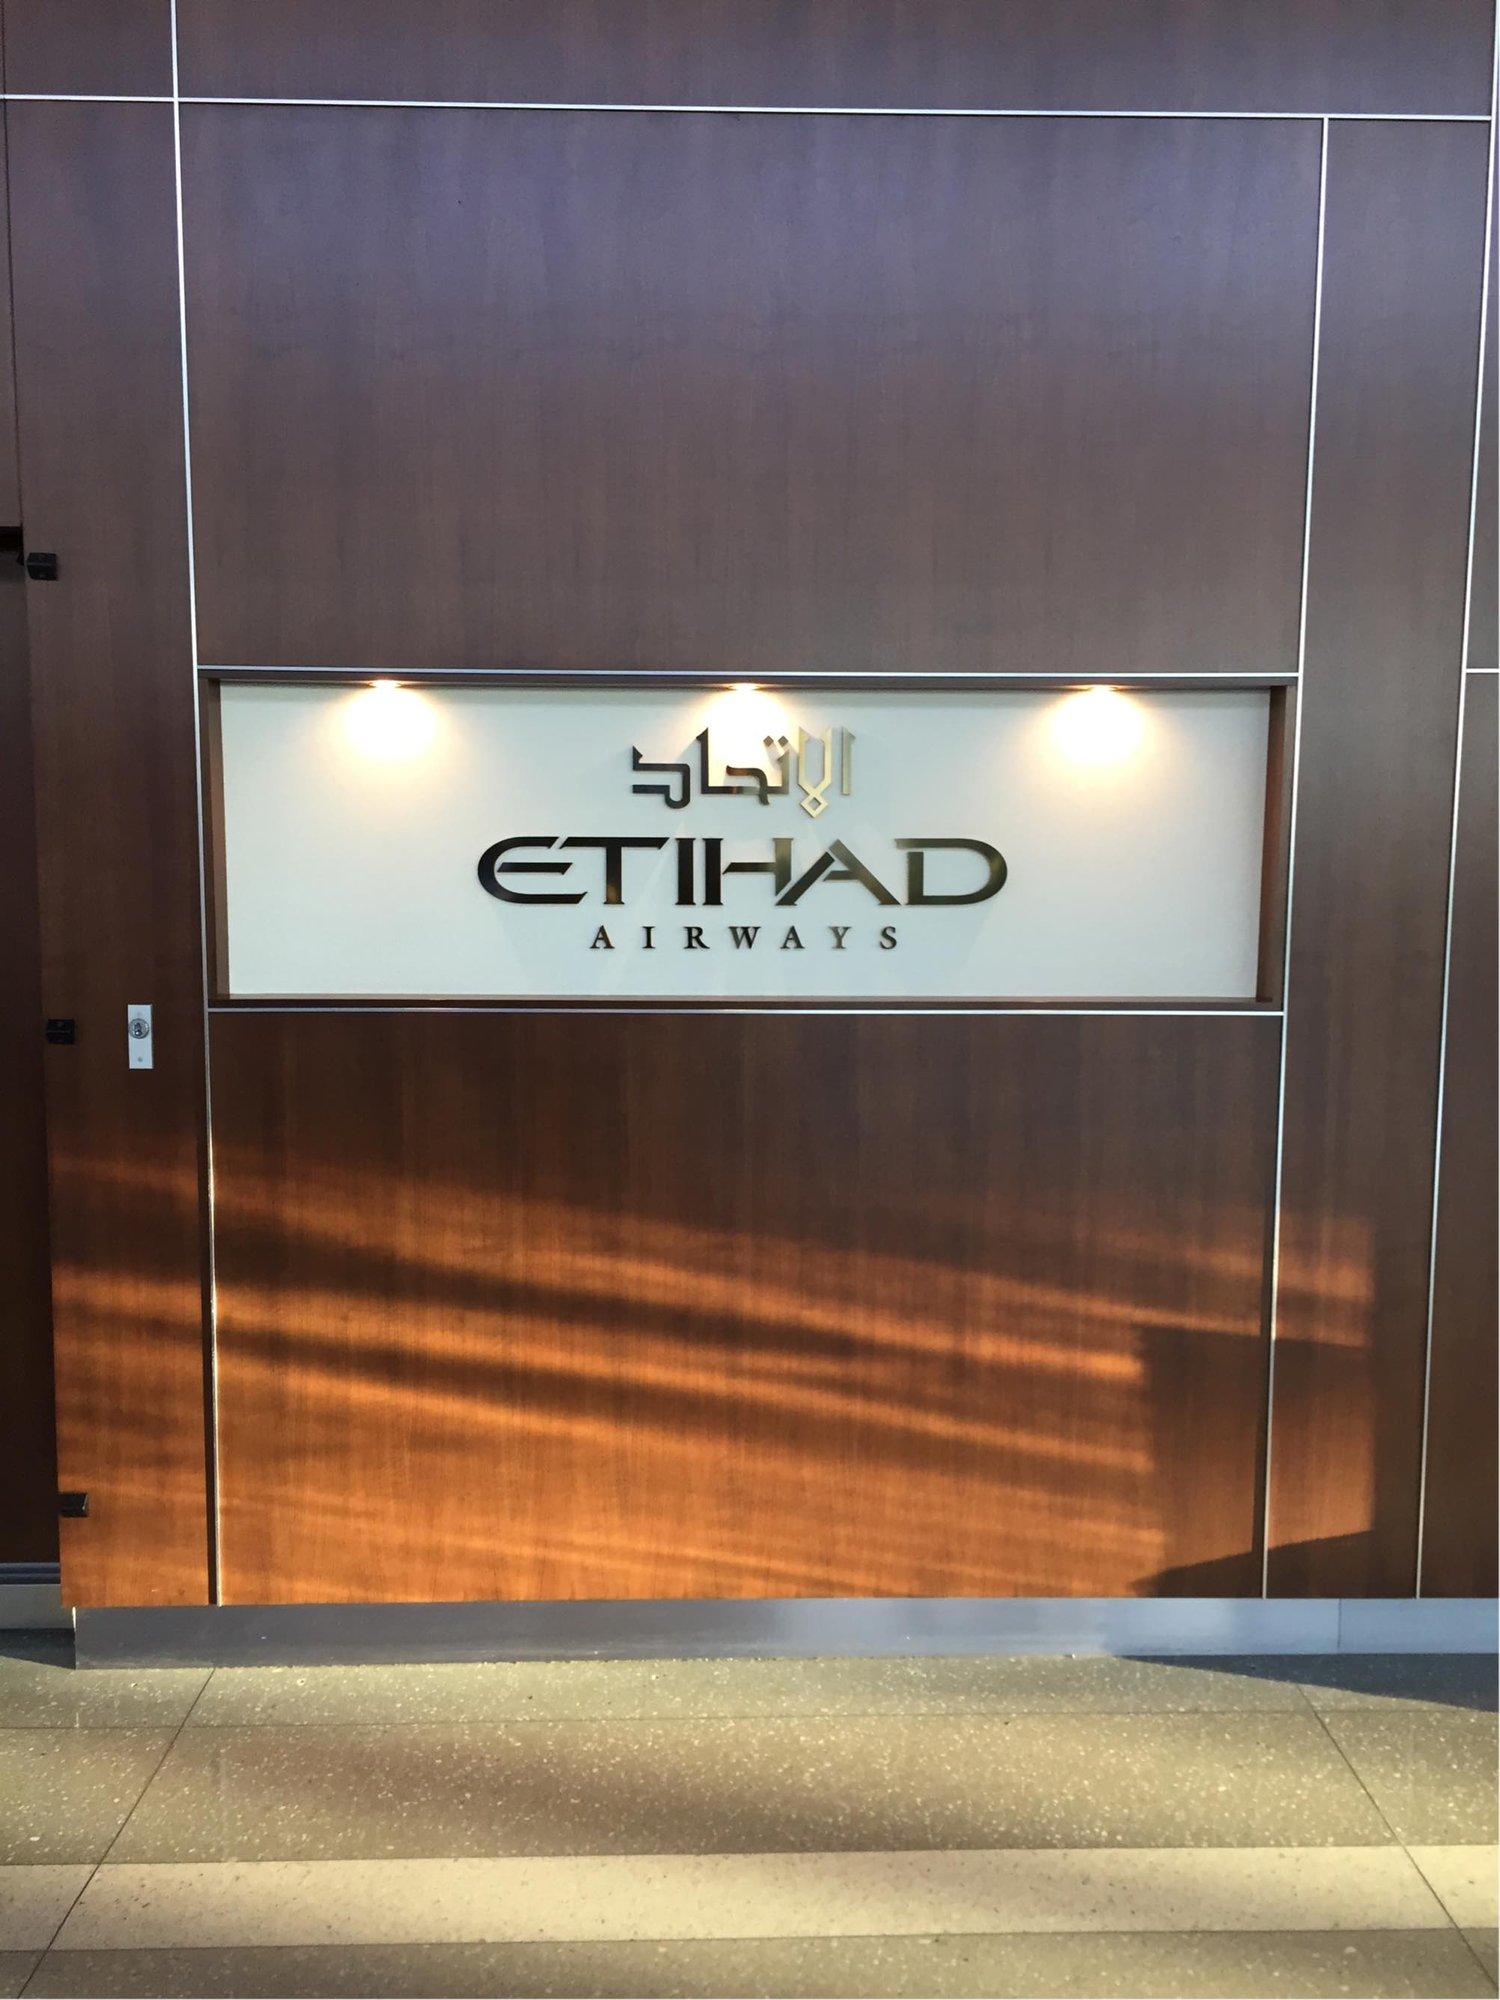 Etihad Airways First & Business Class Lounge image 10 of 17